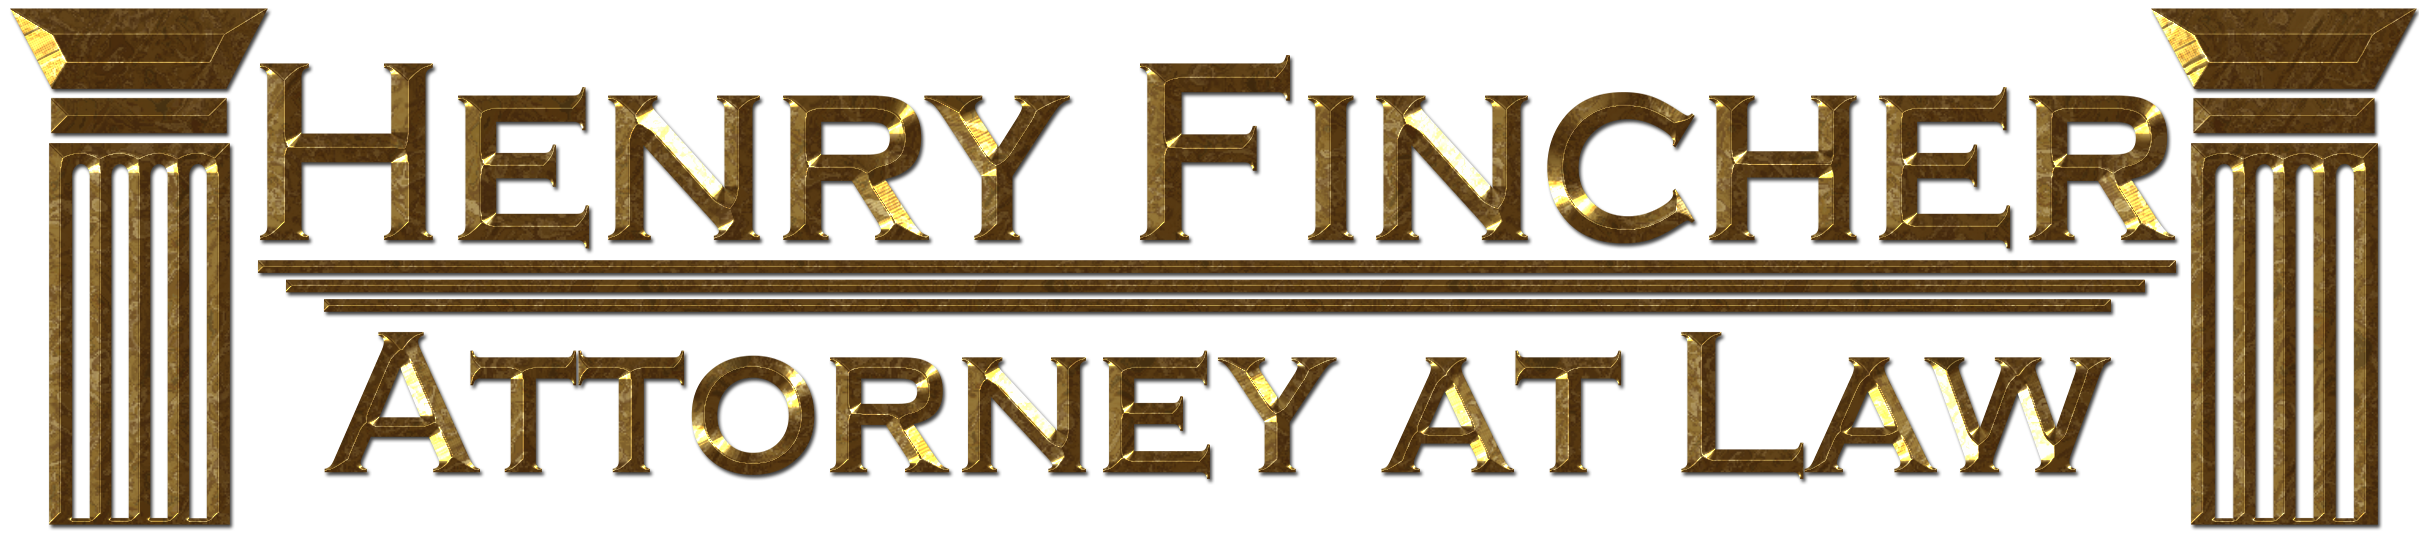 Henry Fincher Logo with columns gold